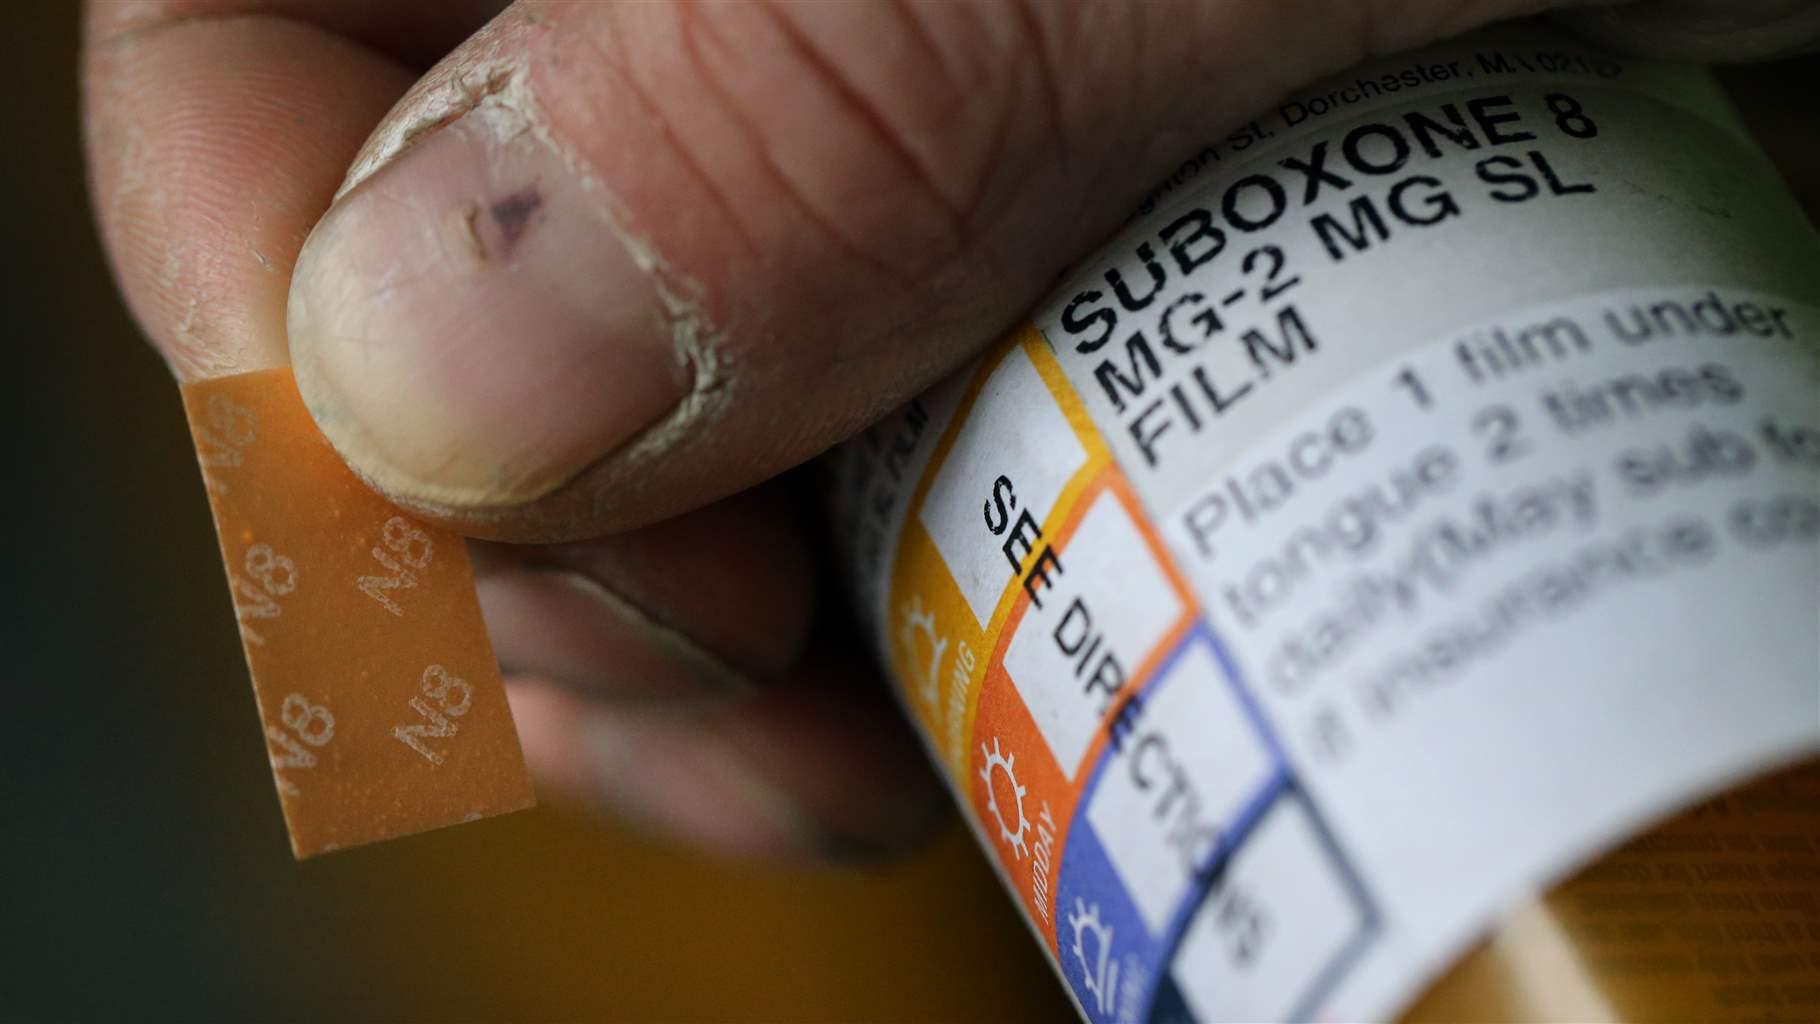 A patient displays his Suboxone prescription following his appointment at the Substance Use Disorders Bridge Clinic at Massachusetts General Hospital in Boston on April 27, 2018. The patient takes Suboxone, a medicine that contains buprenorphine and naloxone, to treat his substance use disorder. He said he had been addicted to Opioids for 10 years but has been drug free since he started taking Suboxone nearly 2 years ago.